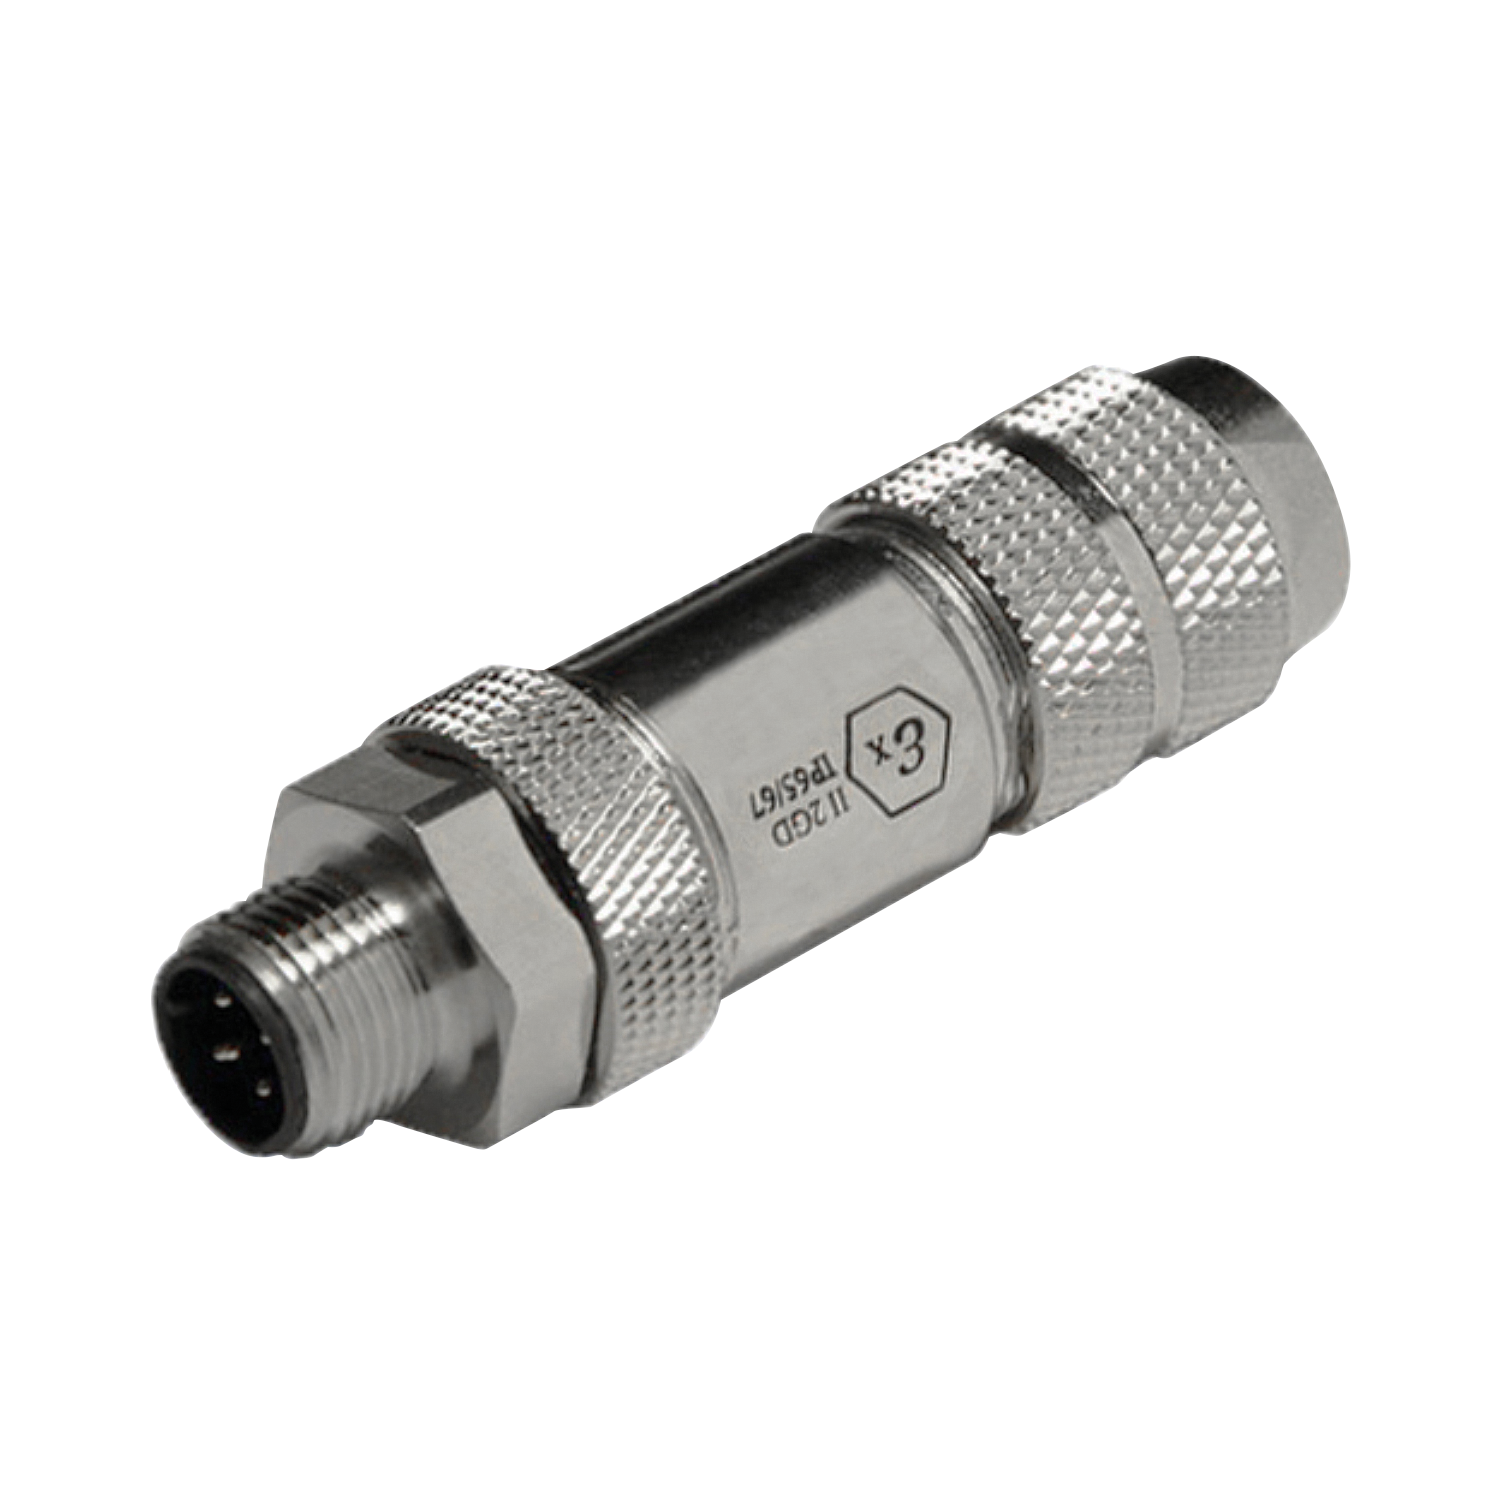 the - - details Kübler M12 for connector Ex-area , Product Group Connector Field-wireable Worldwide